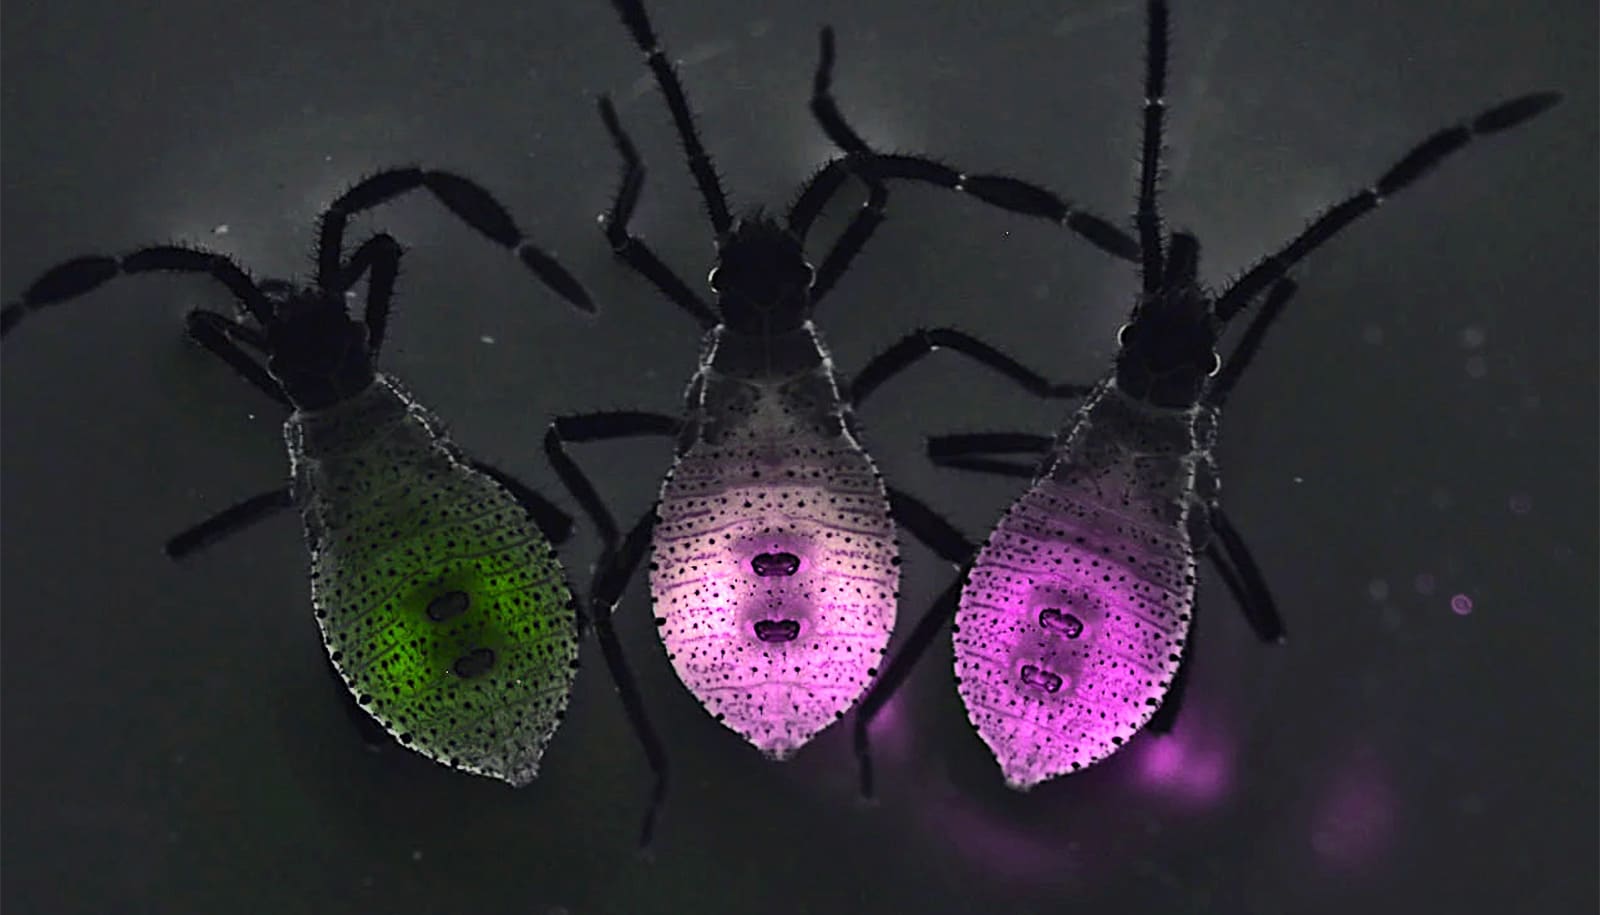 bodies of three bugs glow green or magenta